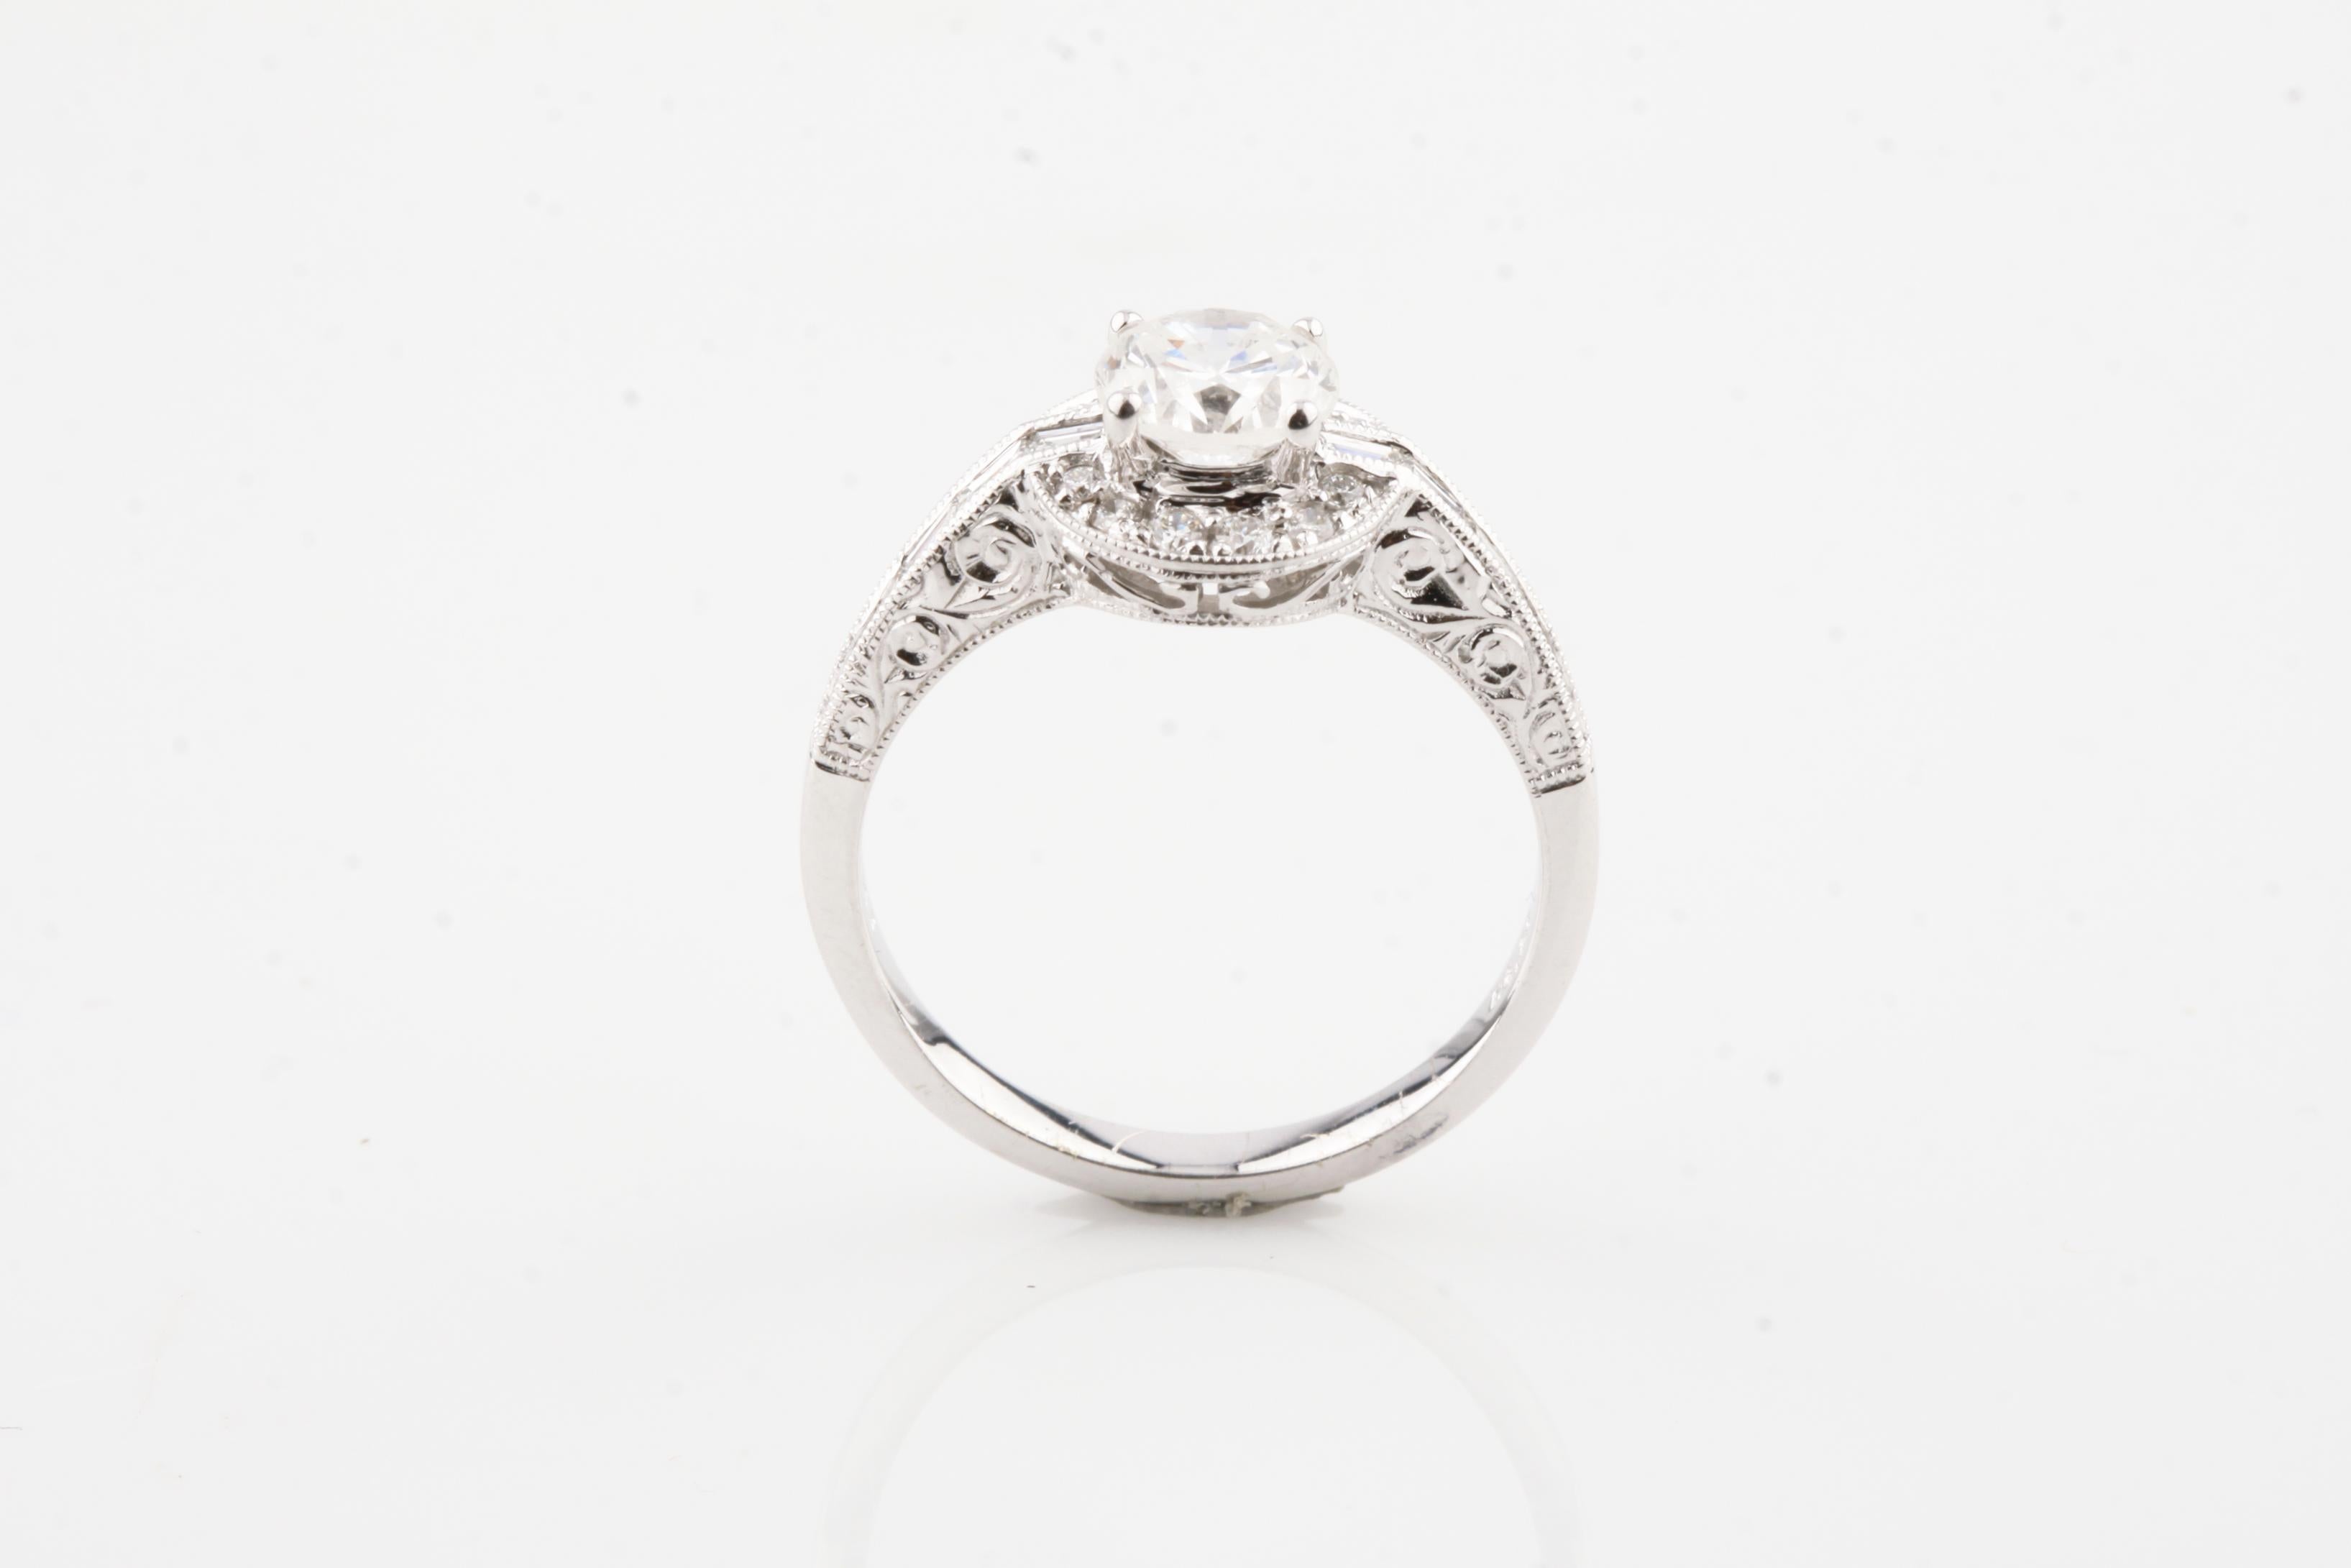 1.40 Carat Round Diamond Halo 18 Karat White Gold Engagement Ring In Excellent Condition For Sale In Sherman Oaks, CA